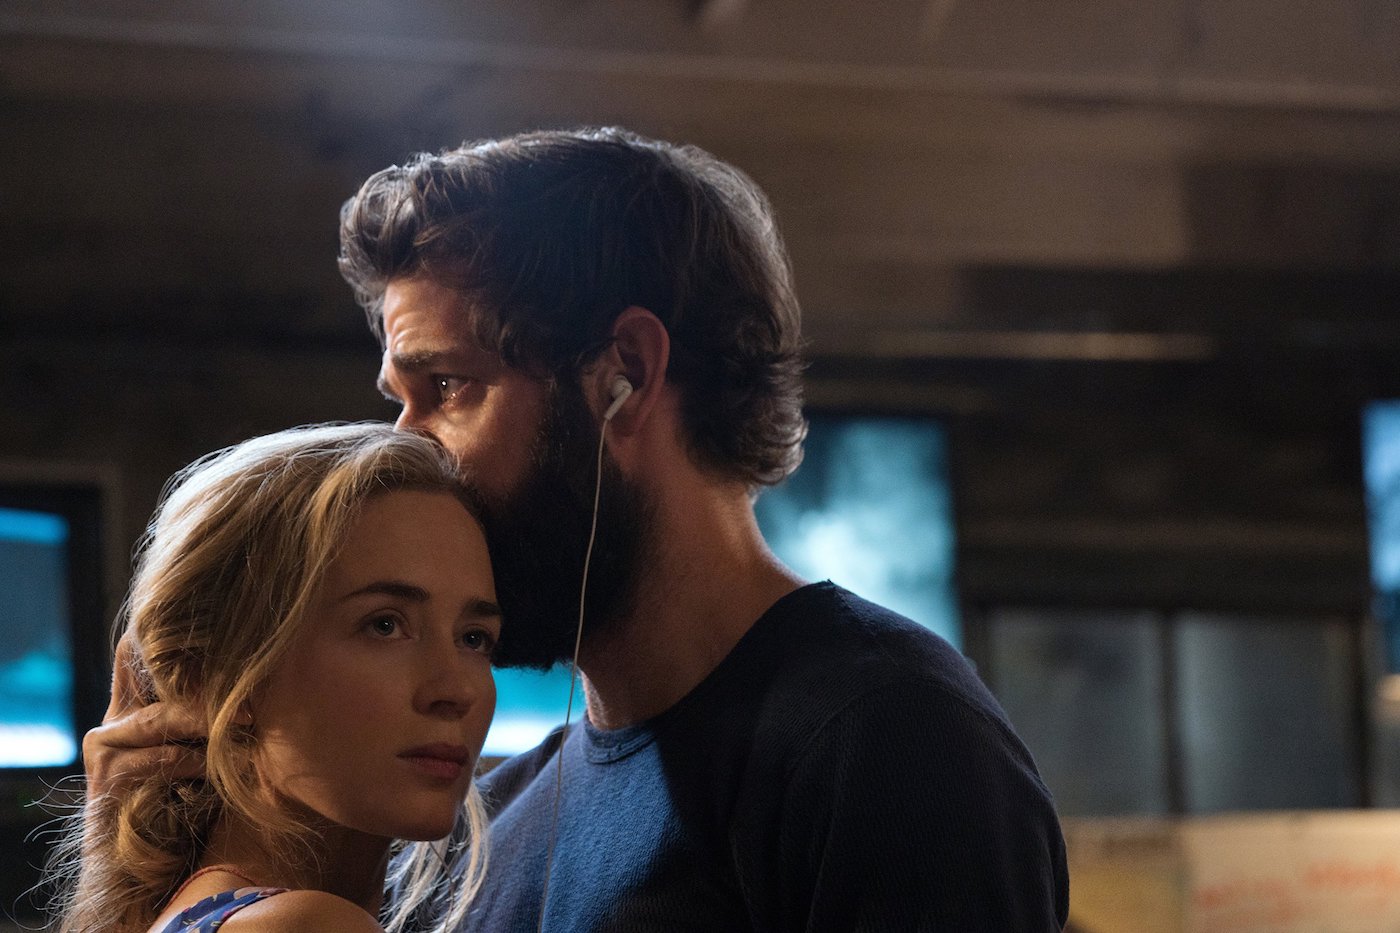 Still from “A Quiet Place”